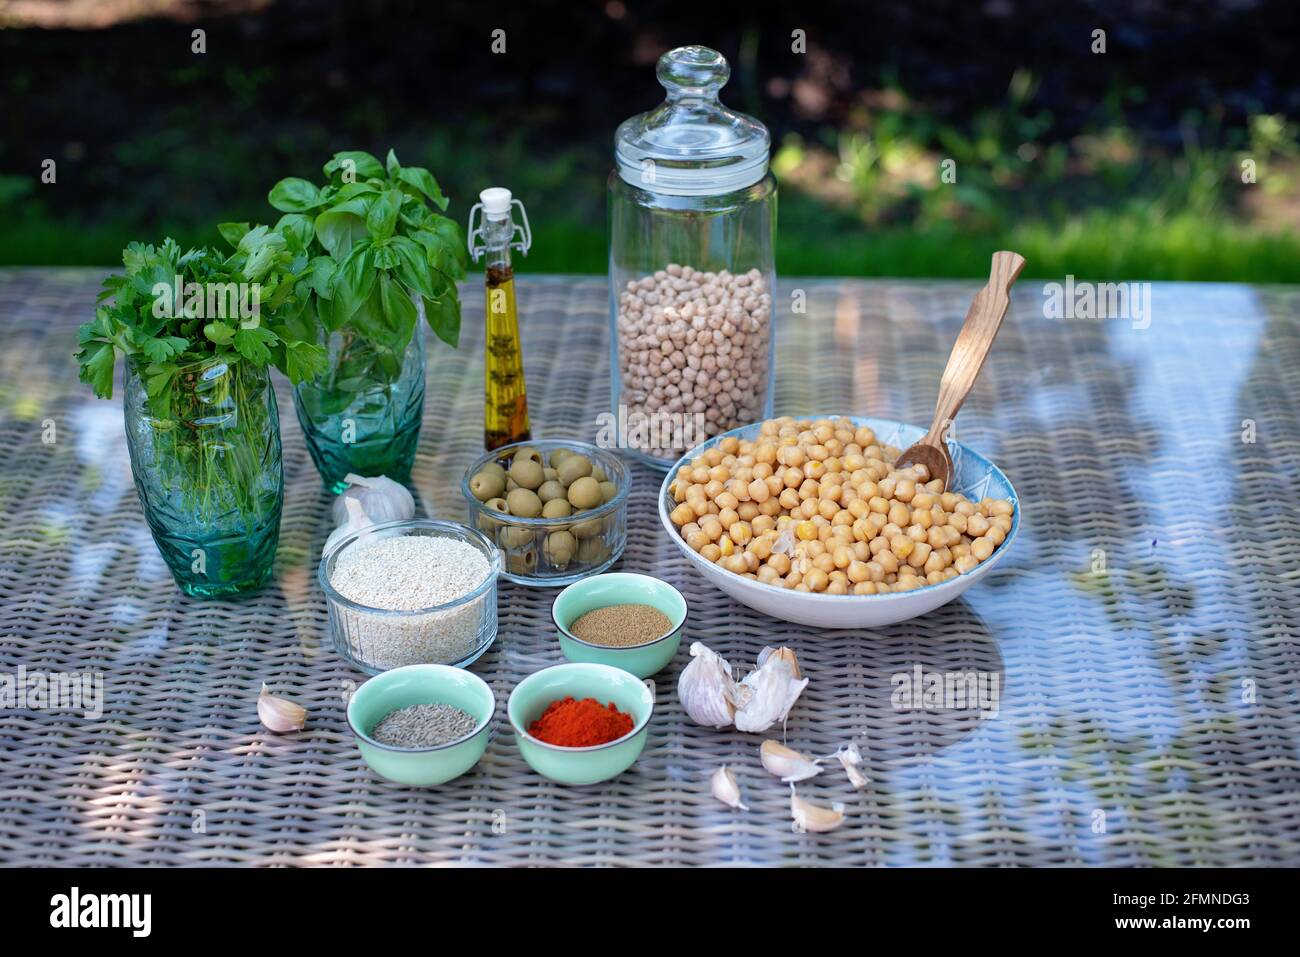 A set of ingredients for the preparation of hummus snacks: chickpeas, tahini, spices, garlic, parsley, olive oil . Recipe for a vegetarian Mediterrane Stock Photo